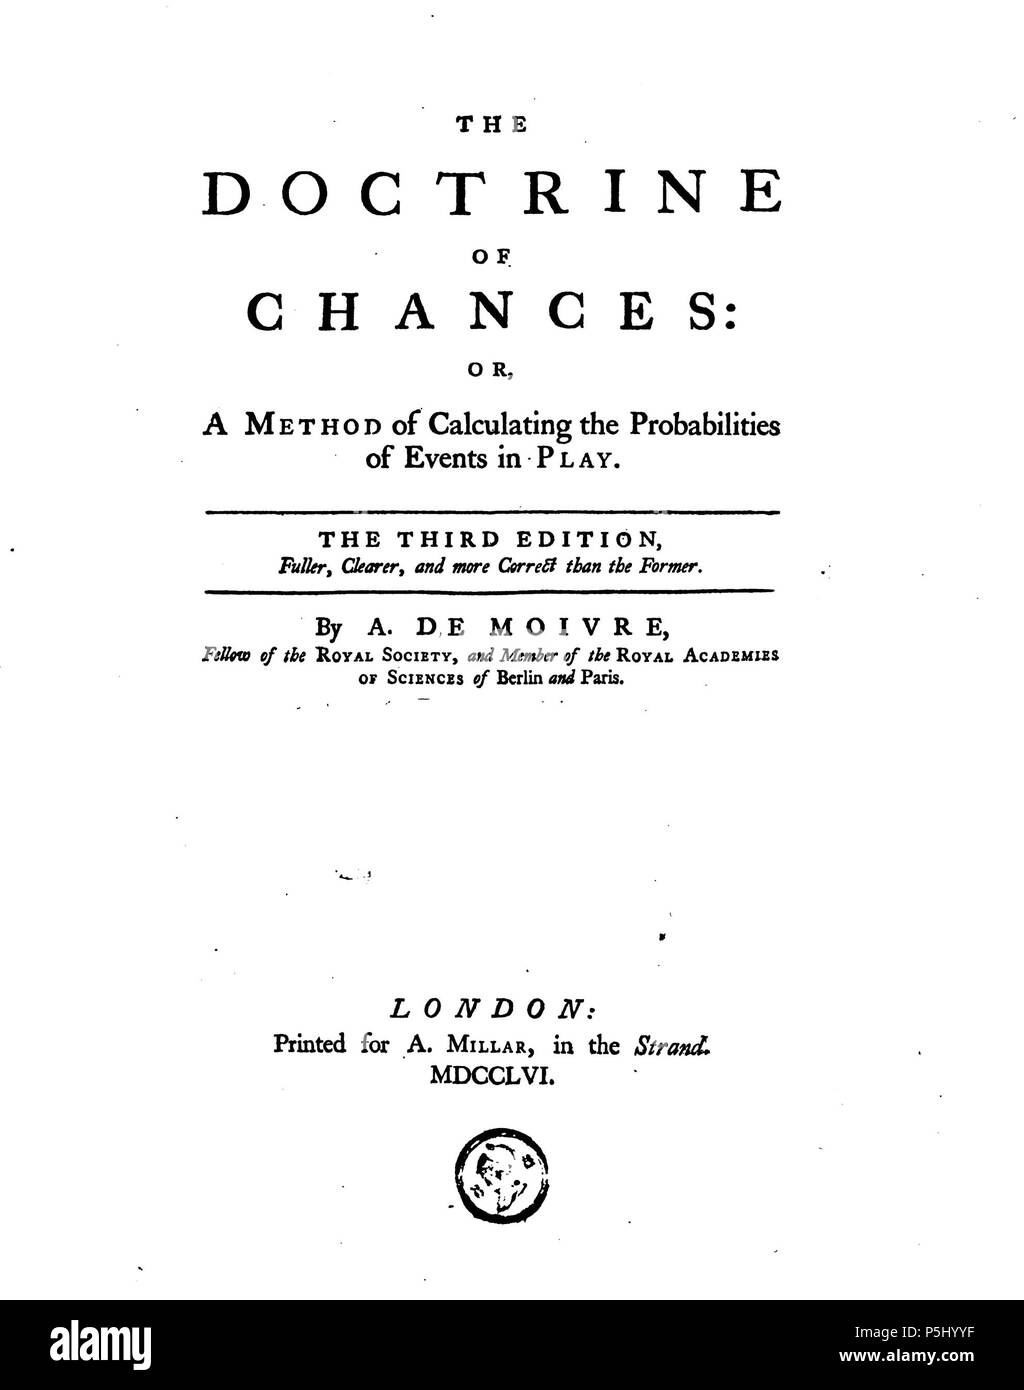 N/A. English: Front page of 'Doctrine of Chance – a method for calculating the probabilities of events in plays' by Abraham de Moivre, Third Edition, London, 1756 . 1756. Abraham de Moivre 53 Abraham de Moivre - Doctrine of Chance - 1756 Stock Photo